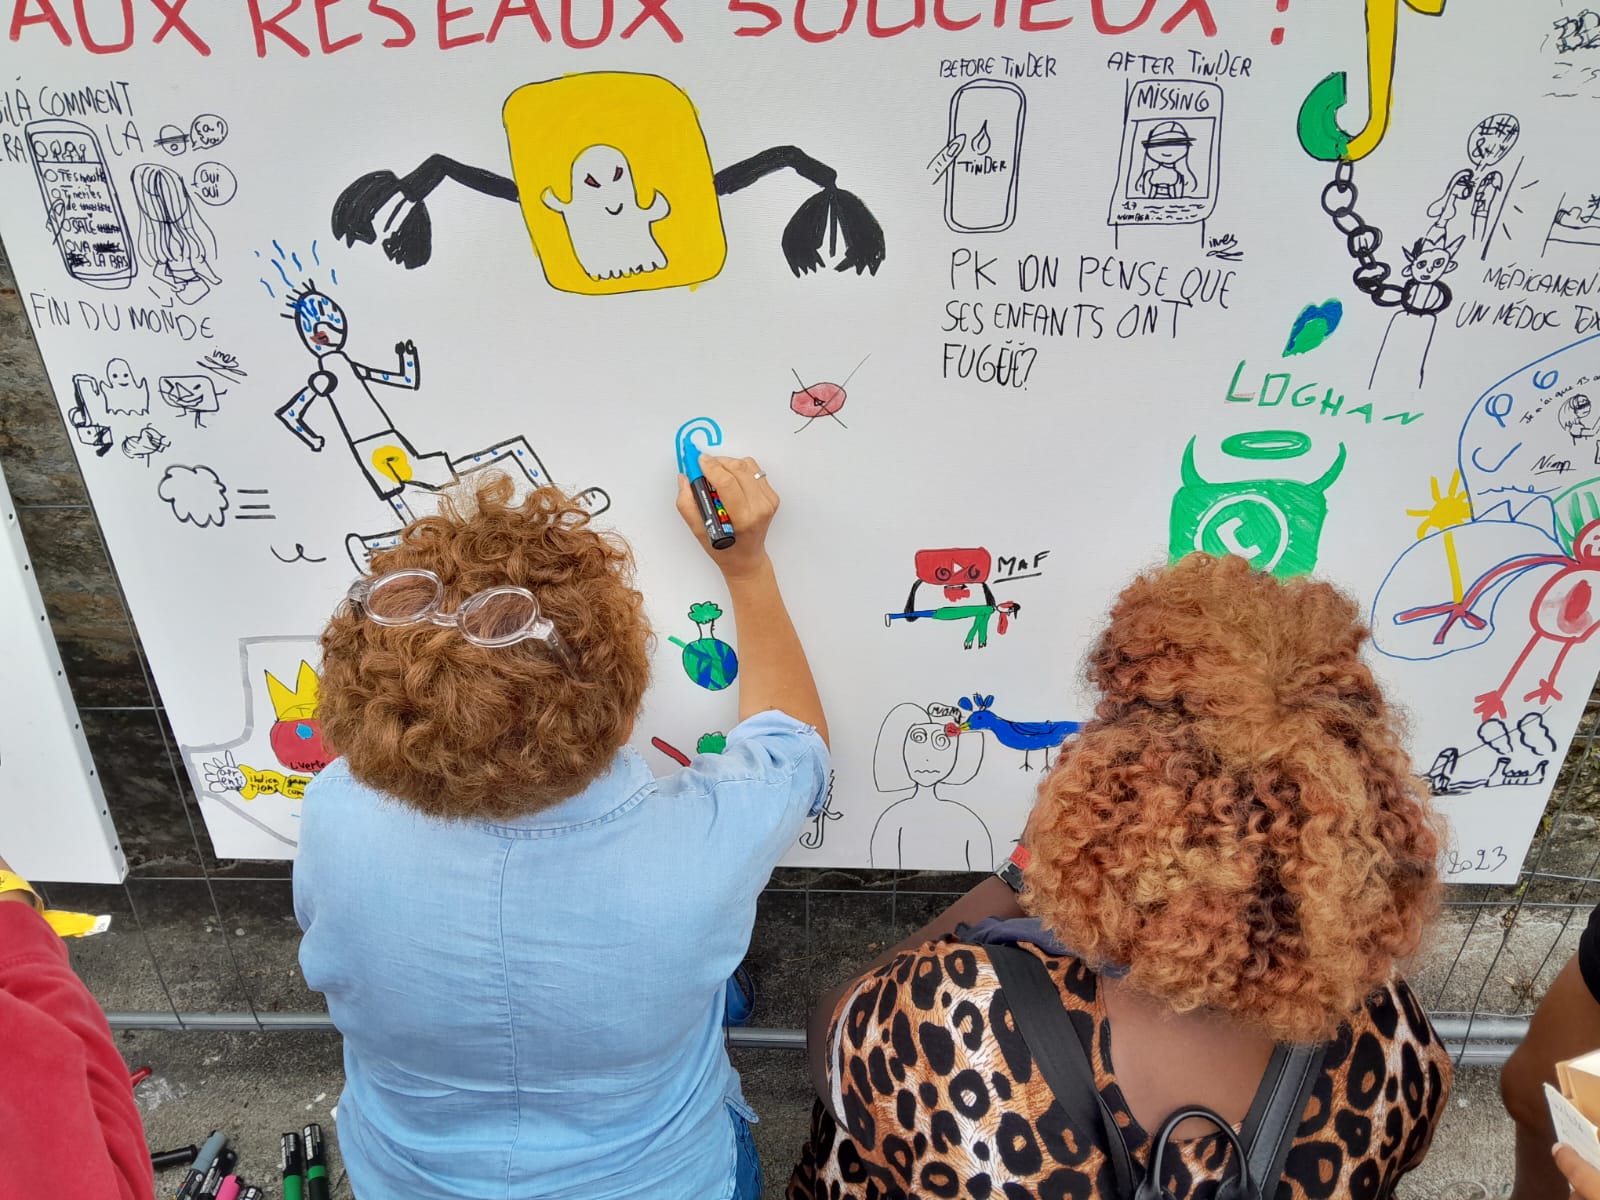 Fresco co-created by cartoonists and young people – Dlog (Tunisia) and Celeste (Kenya)